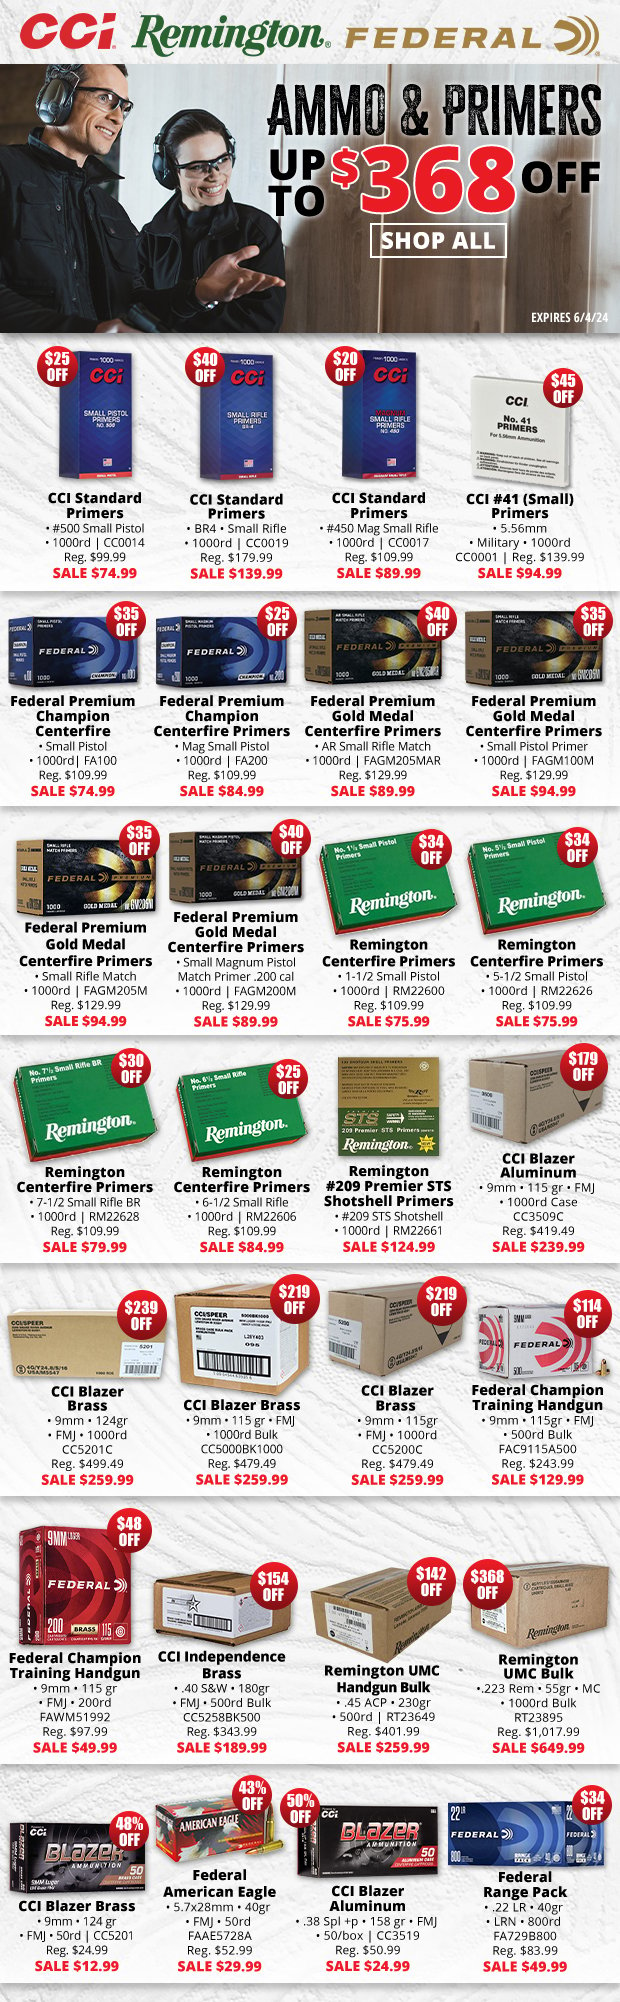 Up to $368 Off Ammo & Primer Deals